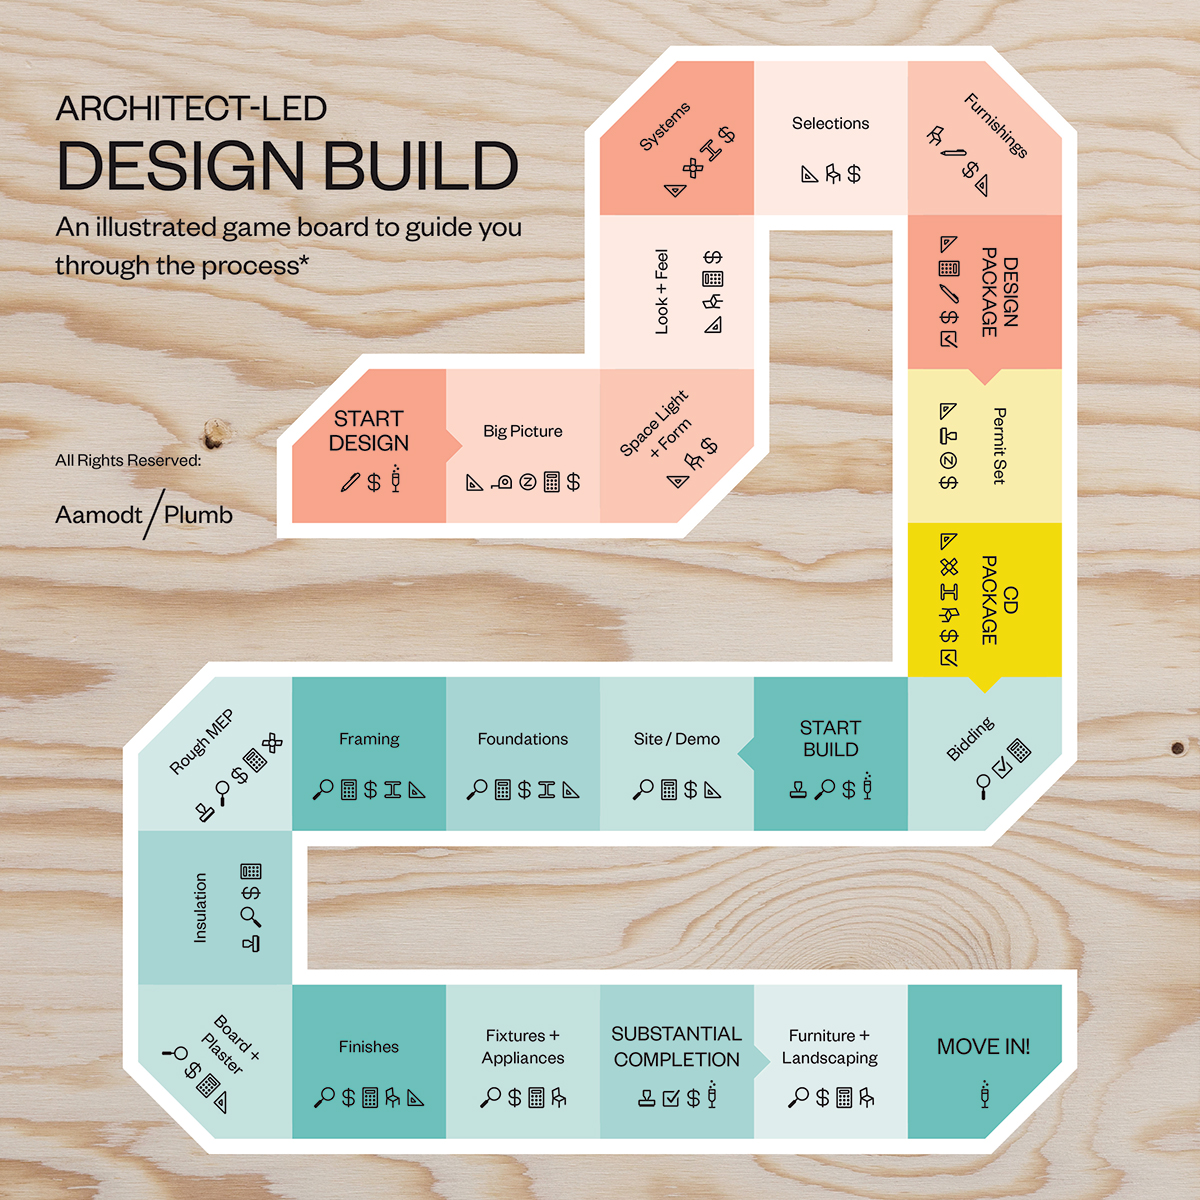 The Design Build Process: An Illustrated Game Board To Guide You Step By Step